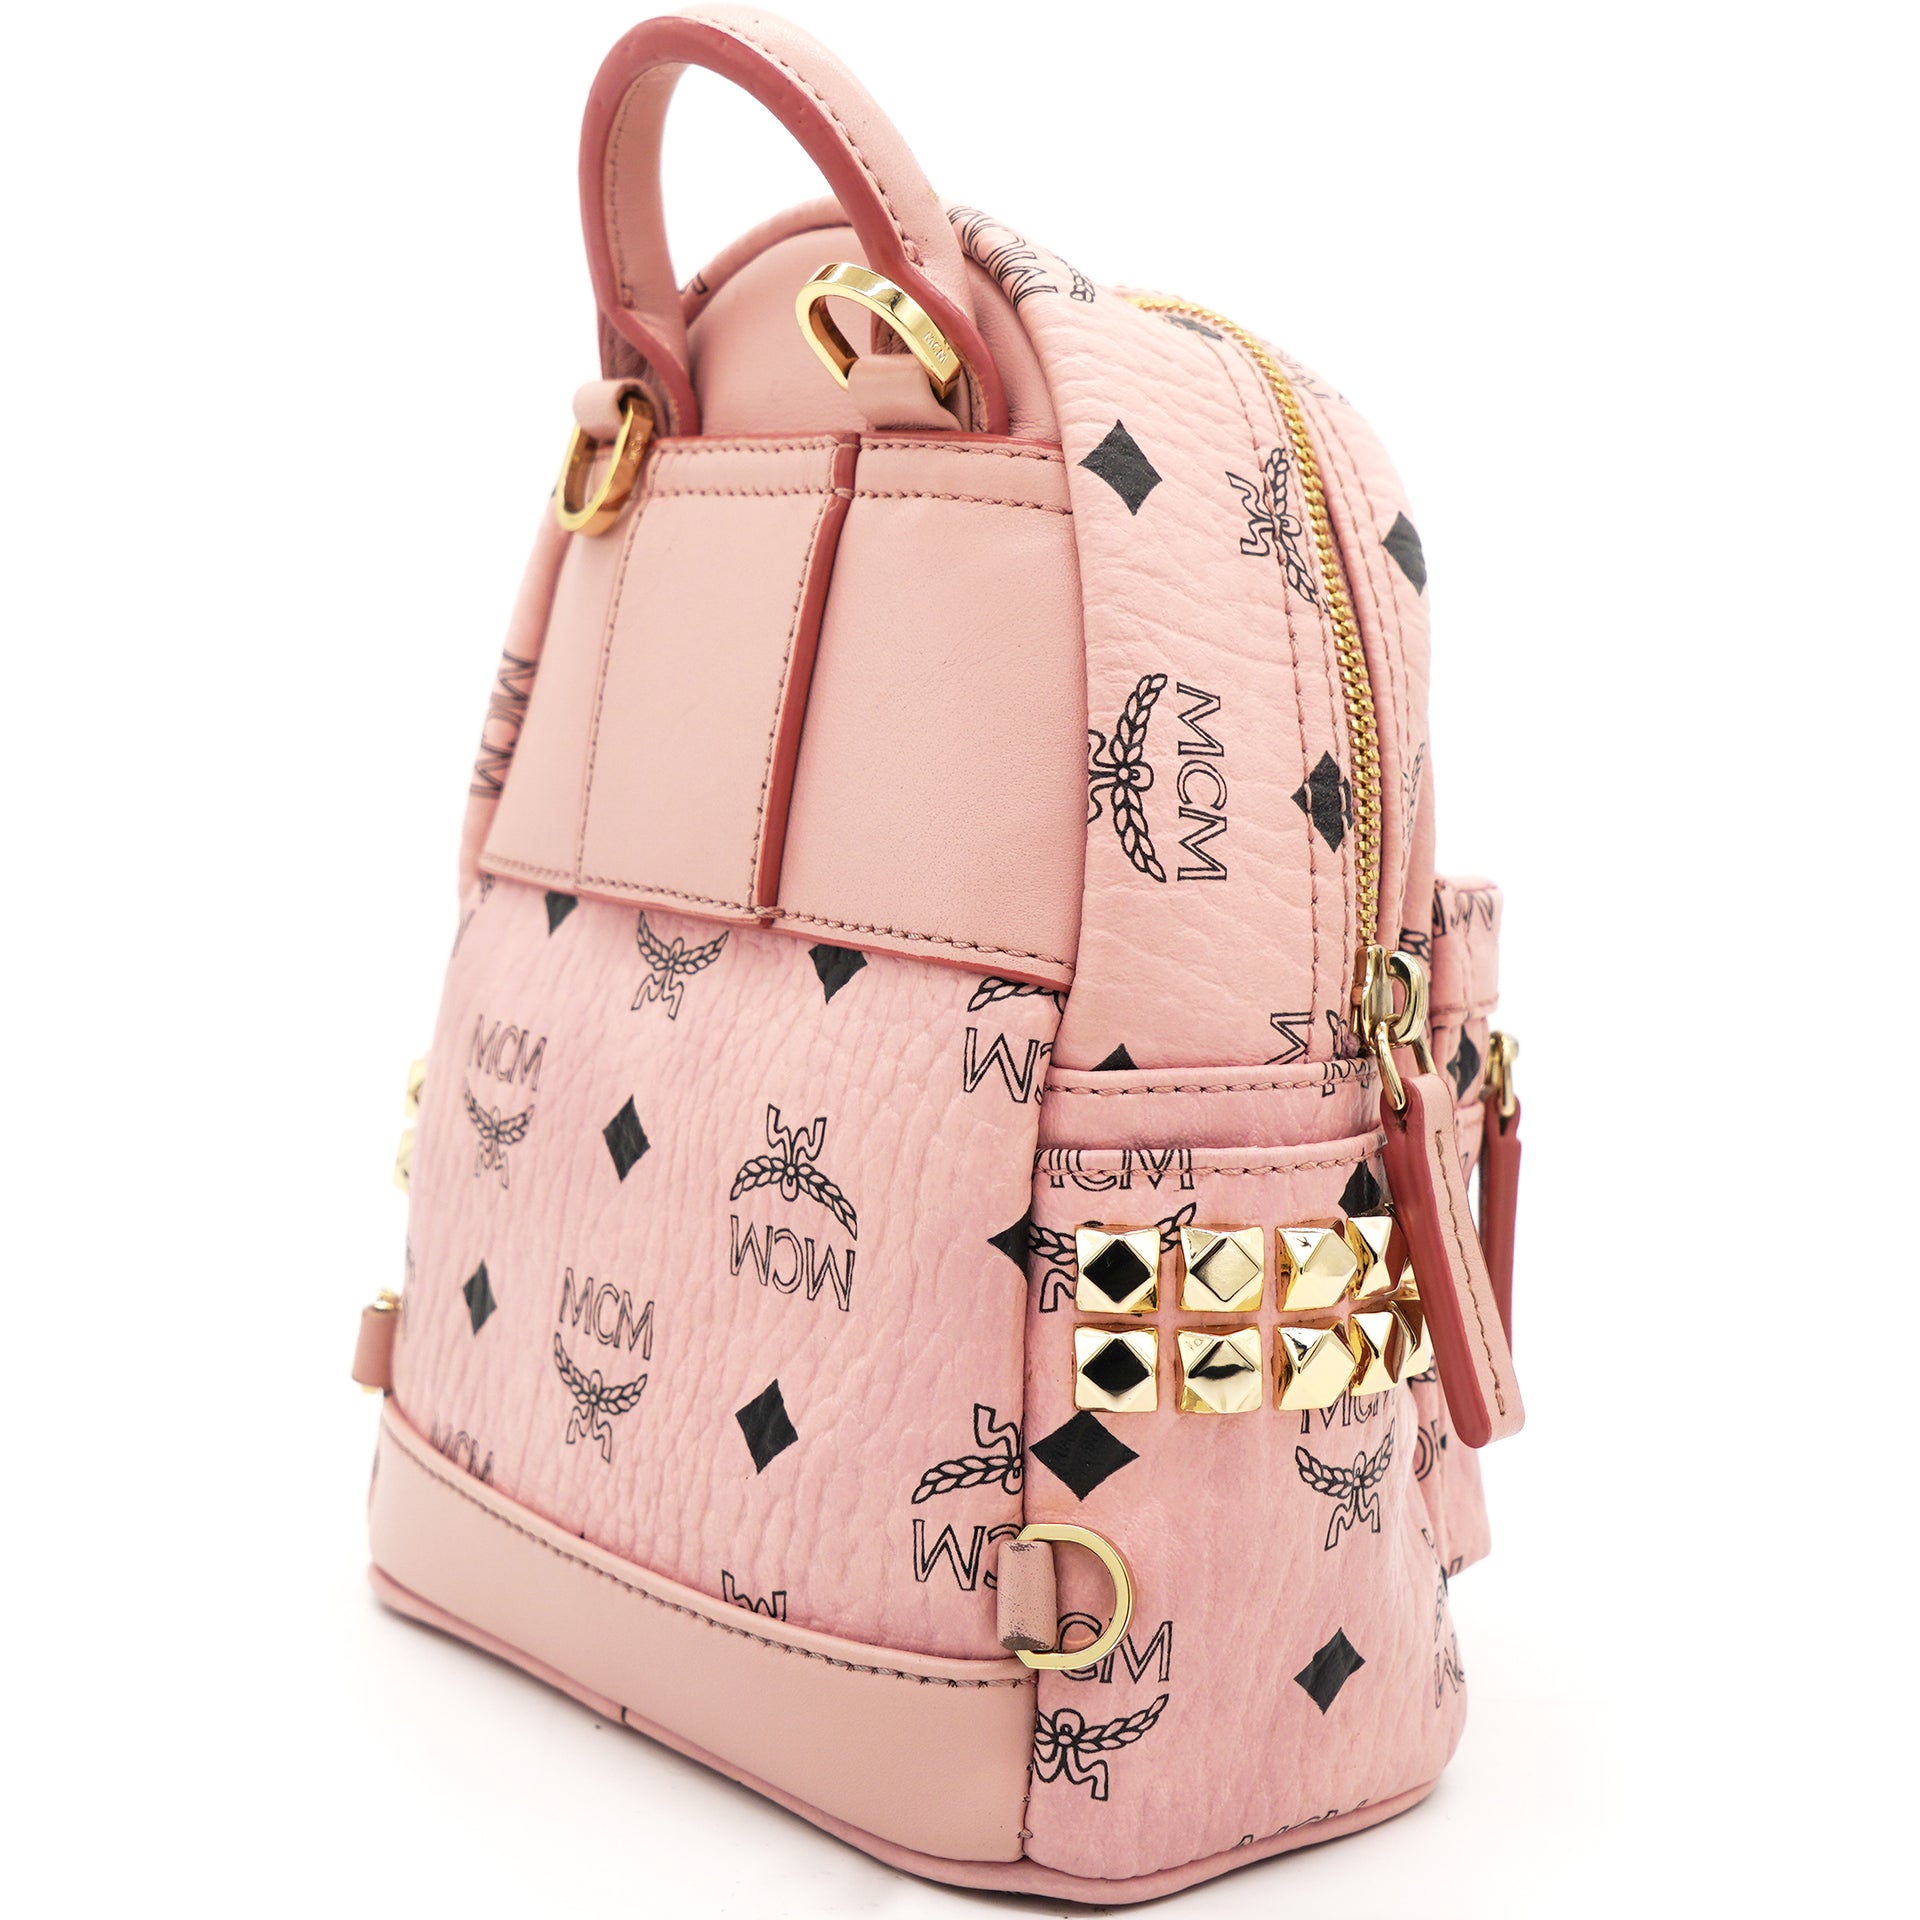 MCM Tan Visetos Coated Canvas and Leather Mini Studded Stark-Bebe Boo  Backpack